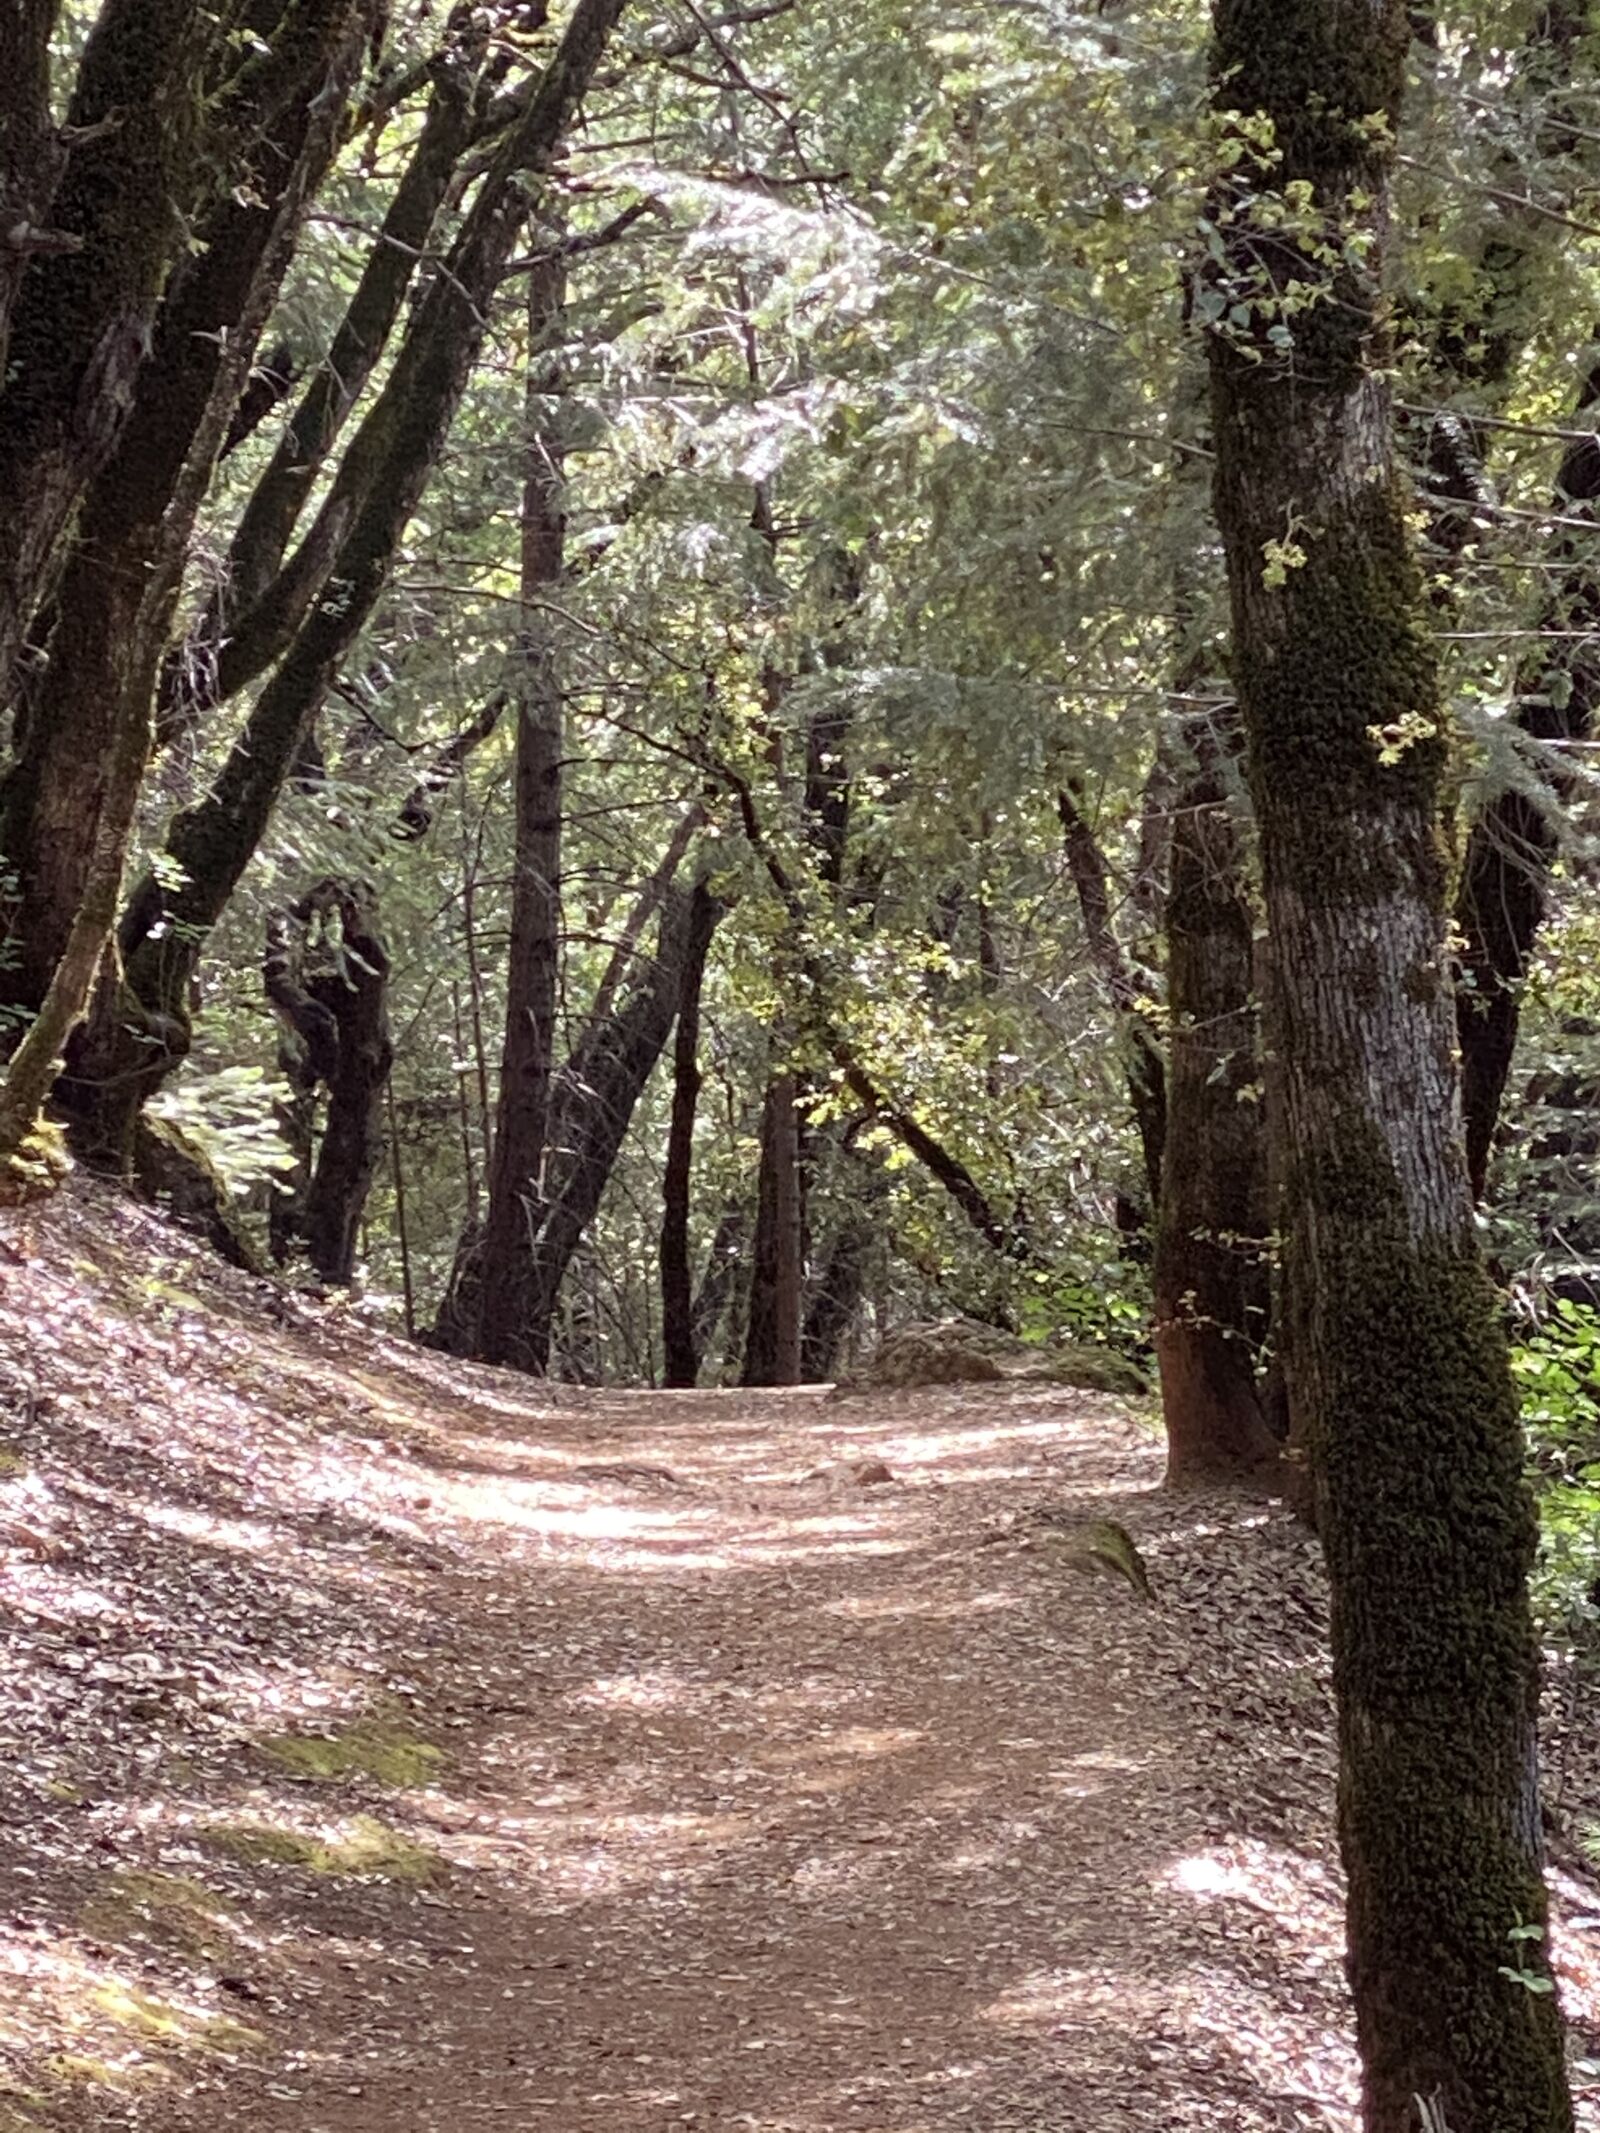 Apple iPhone 11 Pro Max + iPhone 11 Pro Max back triple camera 6mm f/2 sample photo. Forest, path, mystical photography